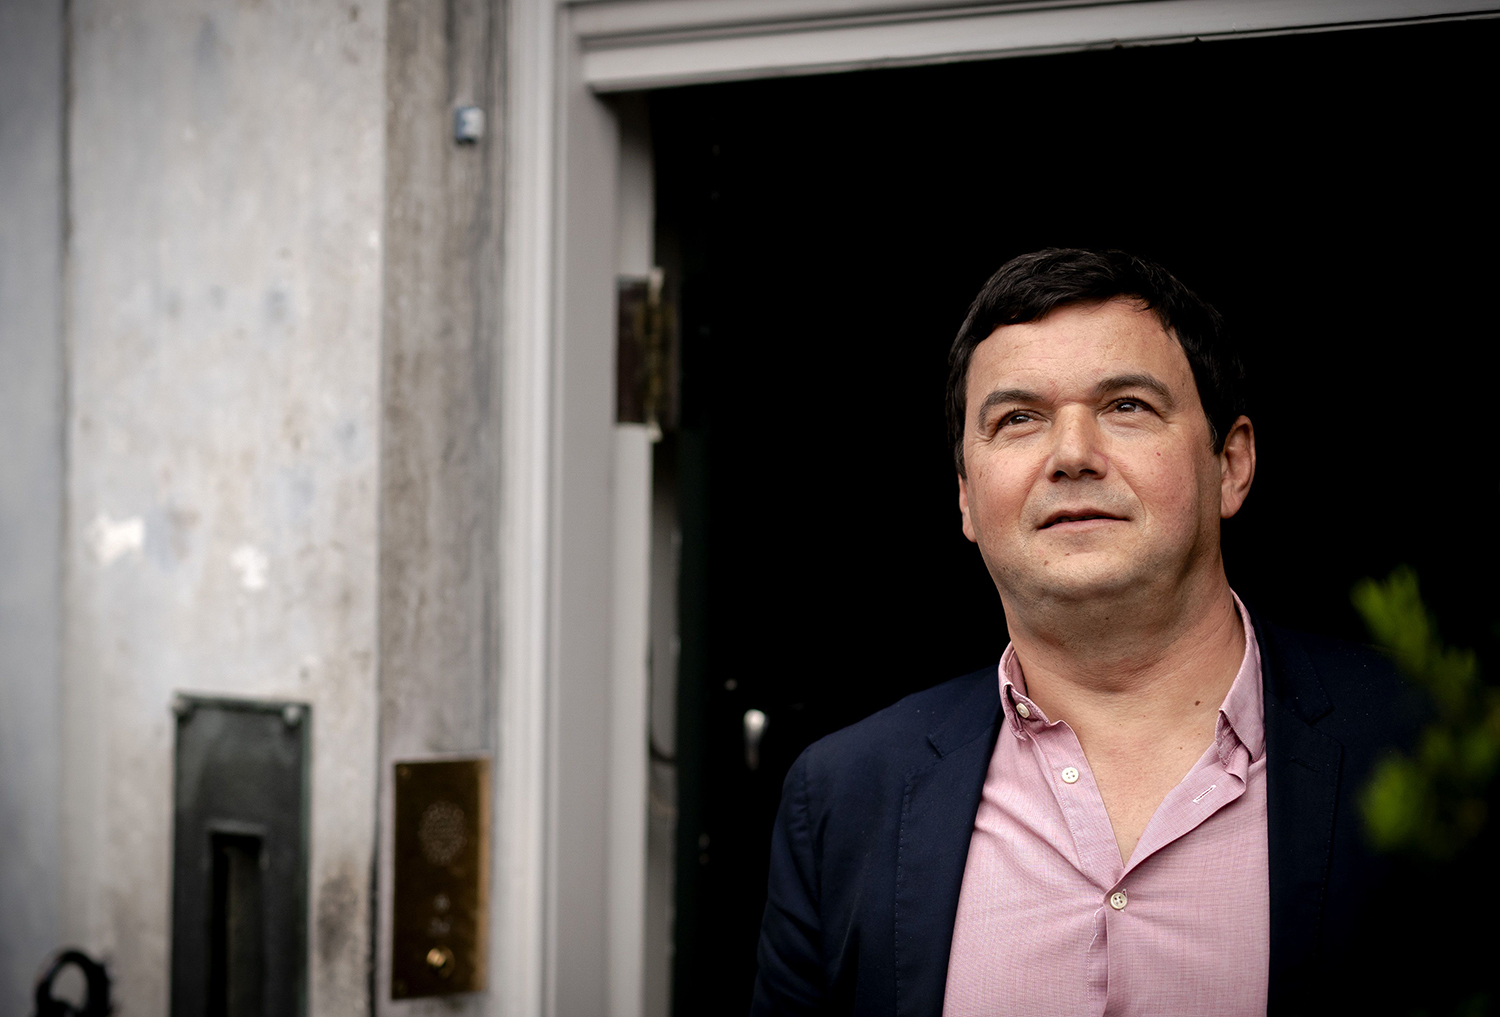 Thomas Piketty: "The Labour Party is too conservative"